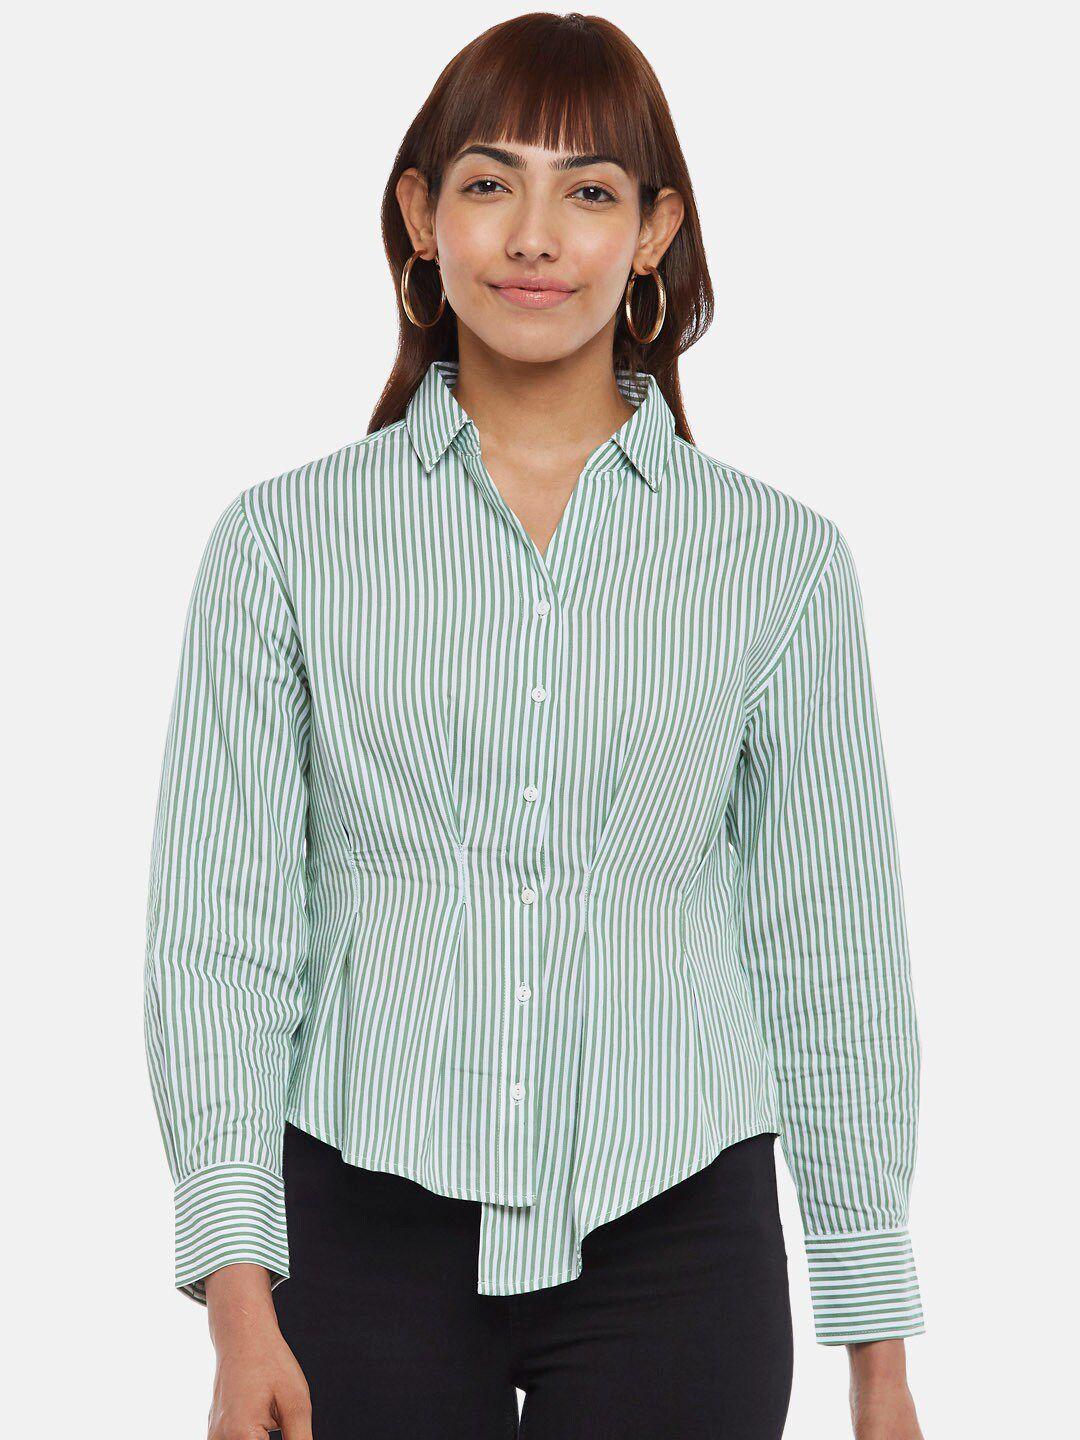 sf jeans by pantaloons women green striped casual shirt